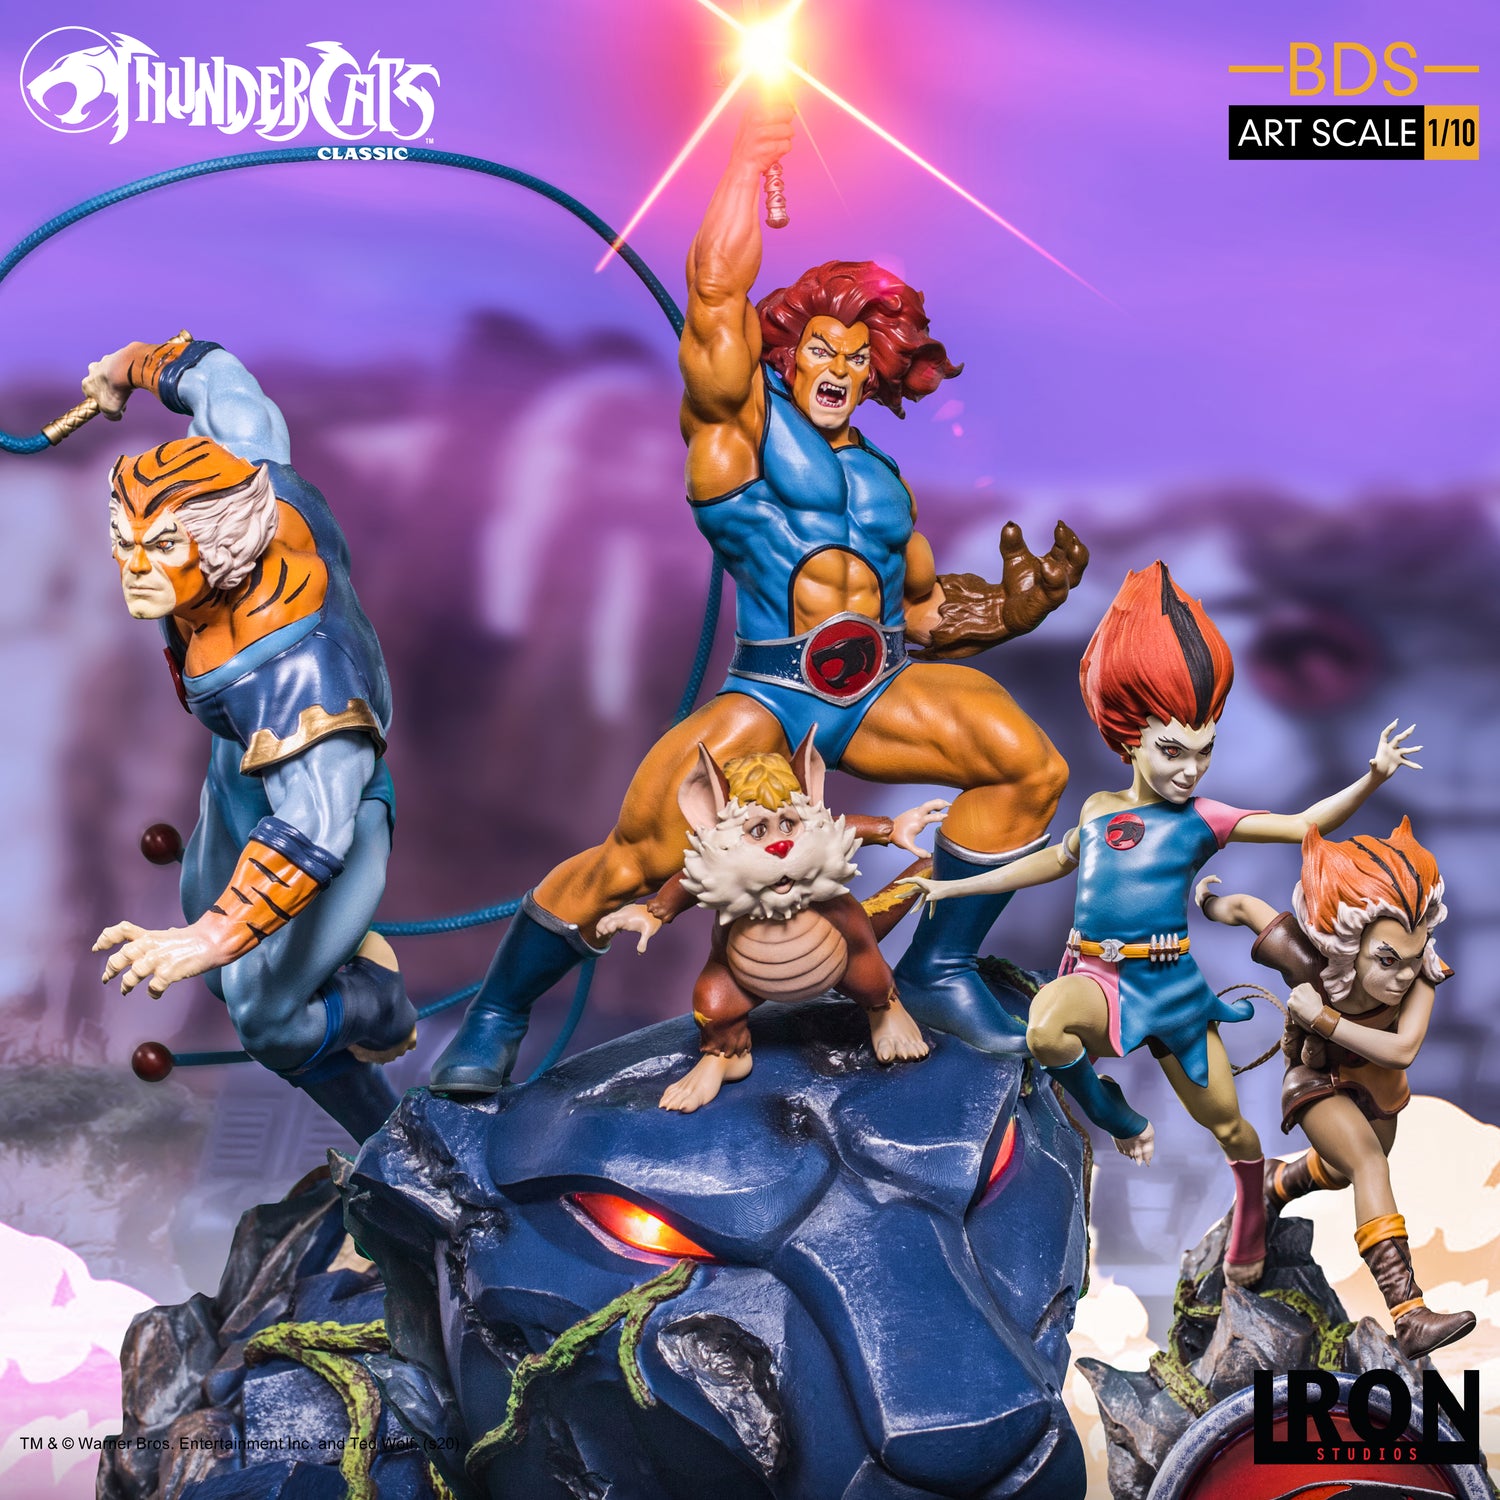 Just Announced Iron Studios -  Thundercats- BDS Art Scale 1/10